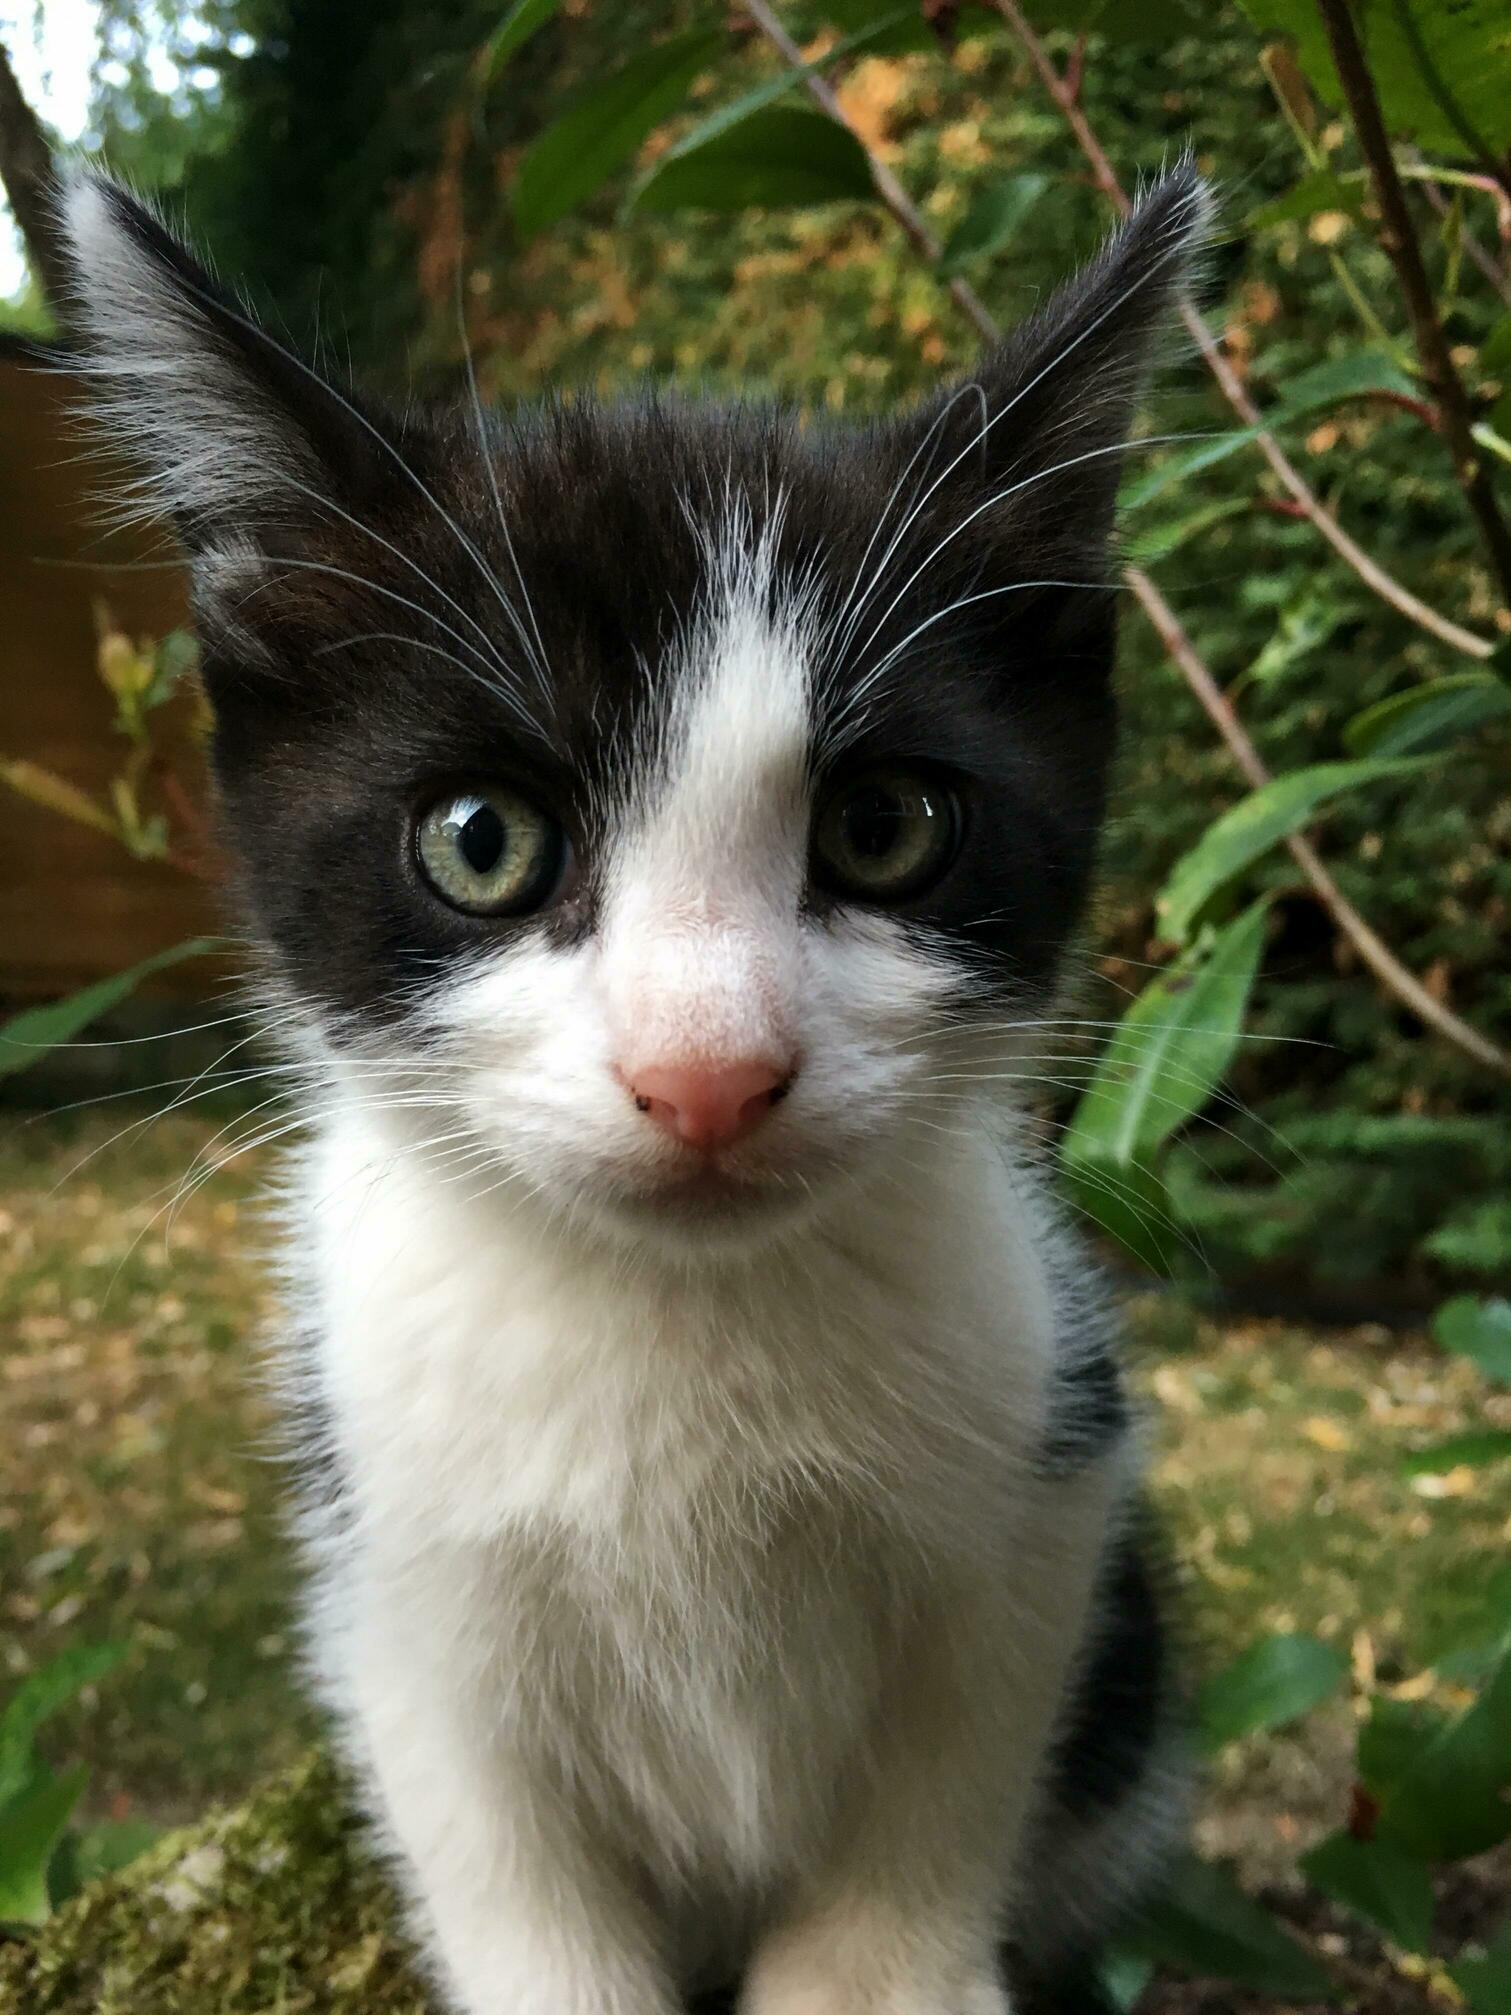 A beautiful kitten that visited my garden today.